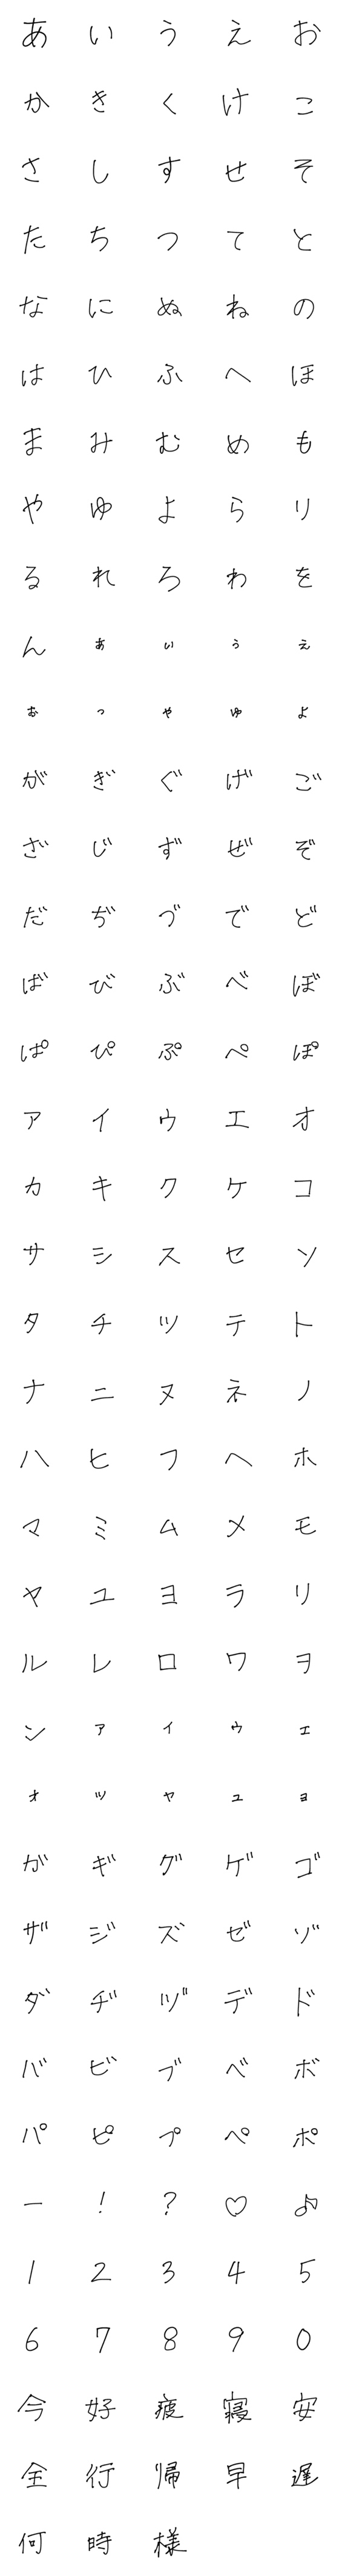 [LINE絵文字]あり文字の画像一覧